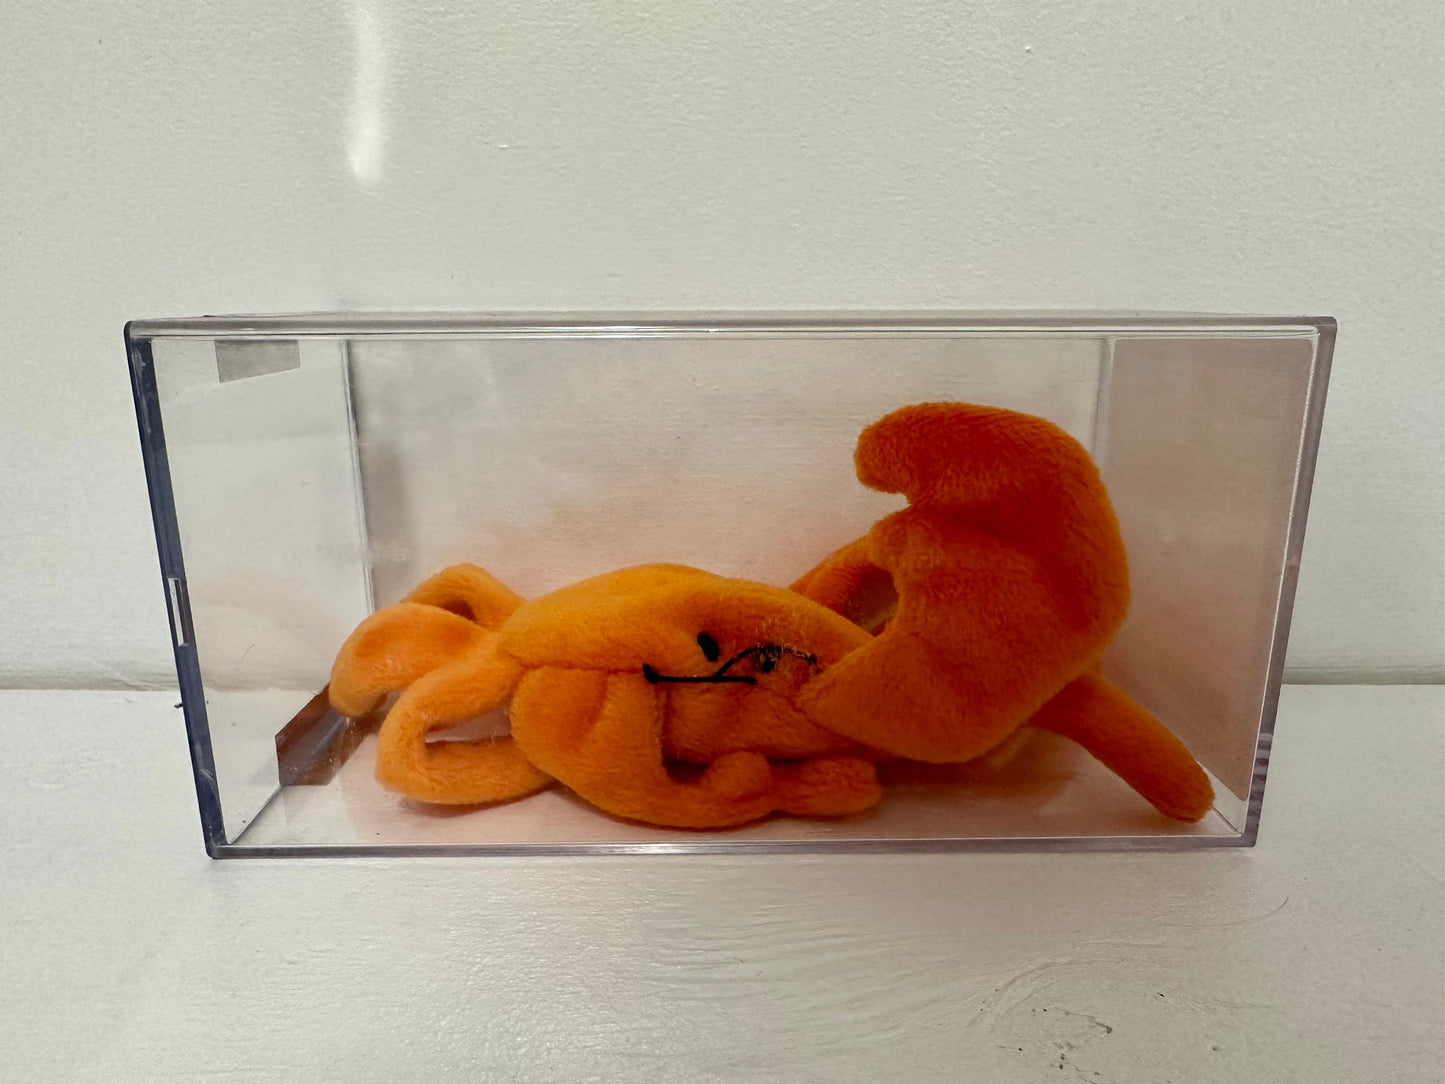 Ty Beanie Baby “Digger” the Orange Crab - 3rd Generation Hang Tag, 1st Gen Tush Tag Authenticated MWMT MQ